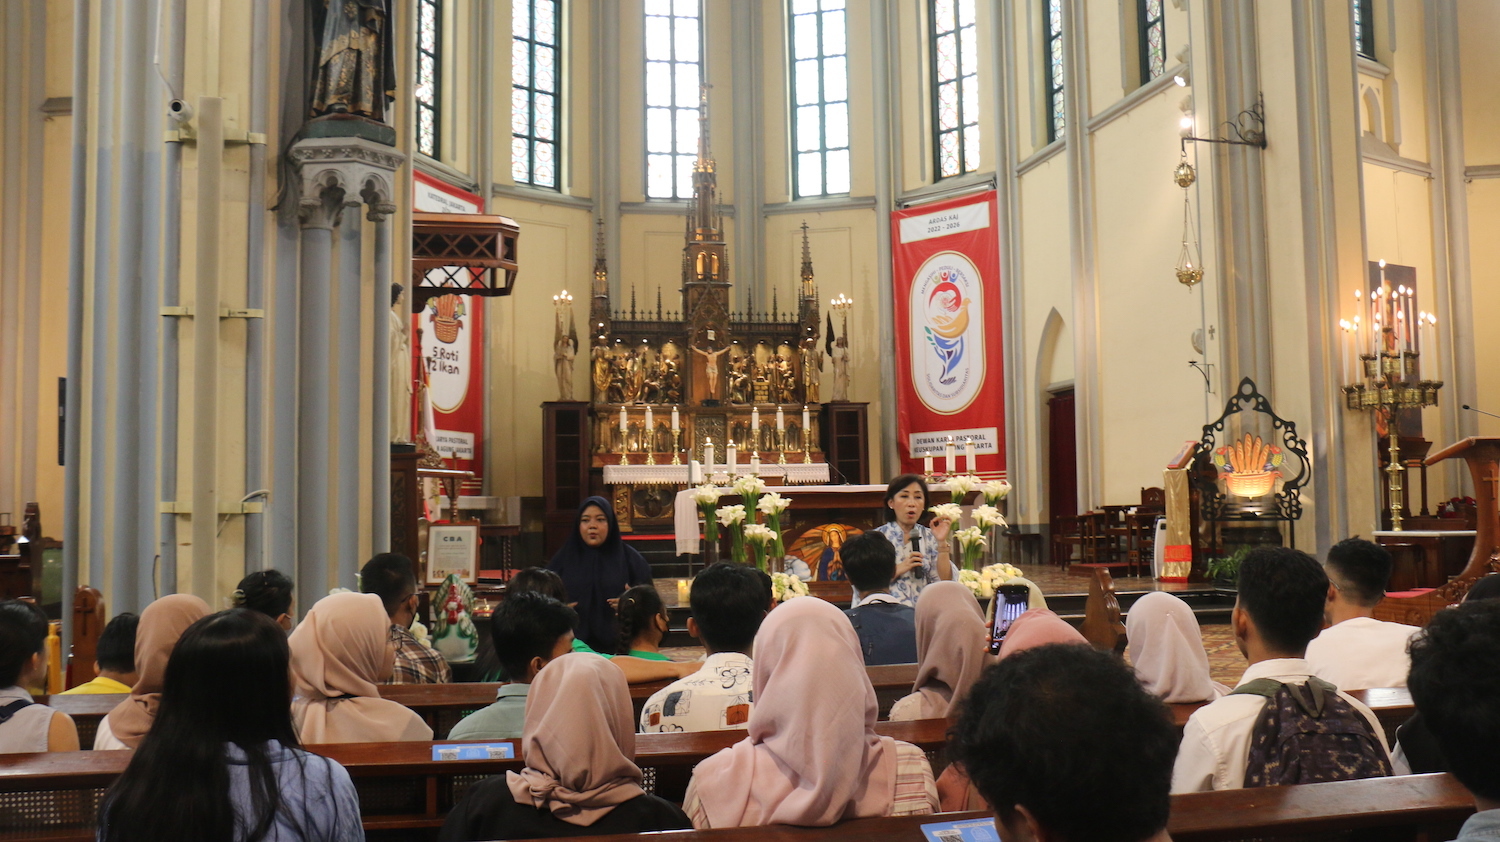 Visitors seated on benches inside Jakarta Cathedral Church with ornate interior design, listening to a woman speaking at the front as Peace!Project 2024 kicks off.